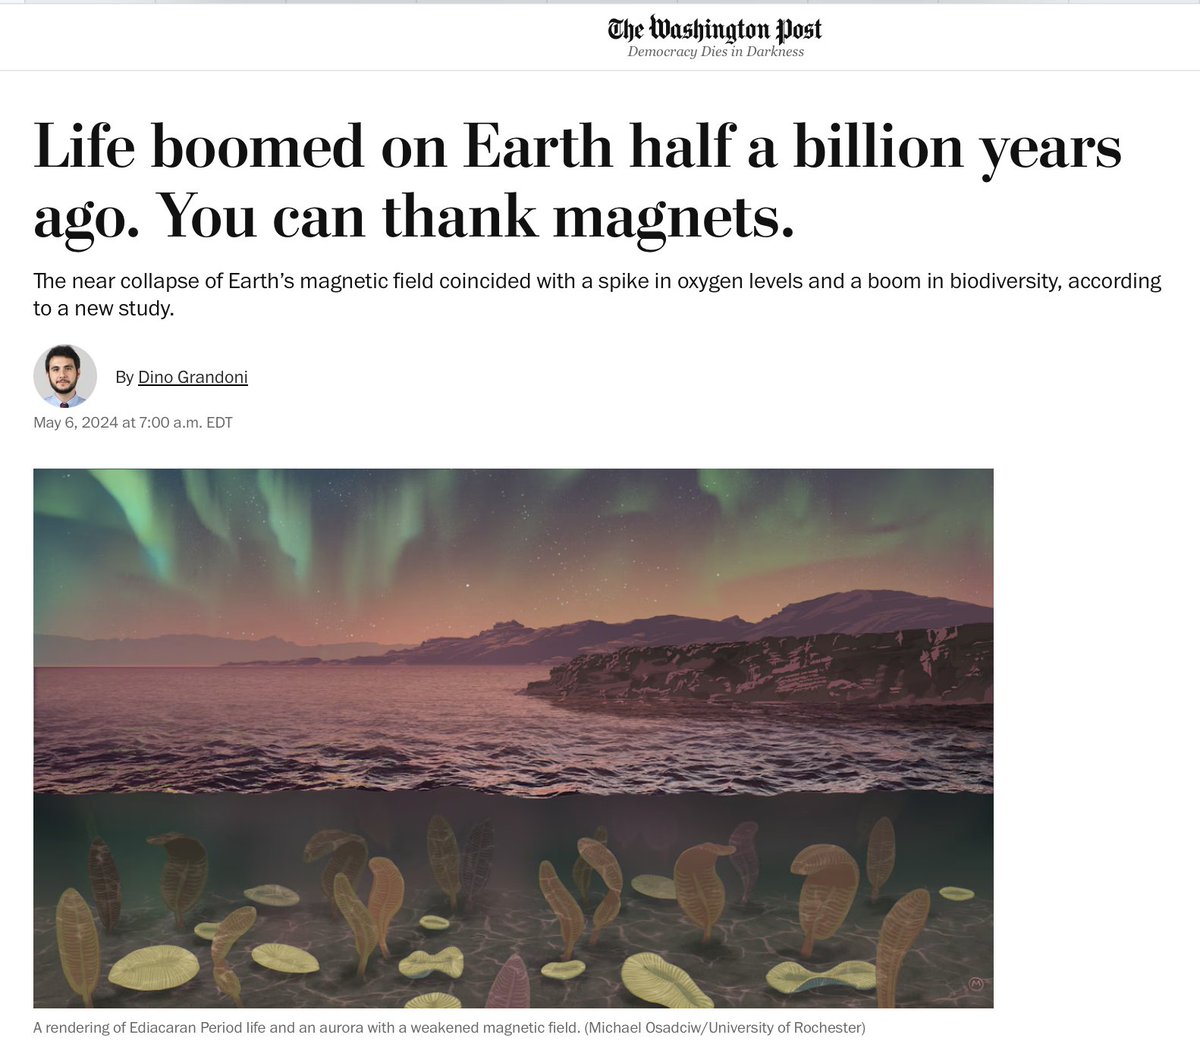 Omitted by WaPo @dino_grandoni: When 'life boomed on Earth' 500 million years ago during the Cambrian period, atmospheric CO2 levels are estimated to have been 7,000 ppm -- a whopping 175 times greater than today's level. CO2 is life. Not mass extinction.…